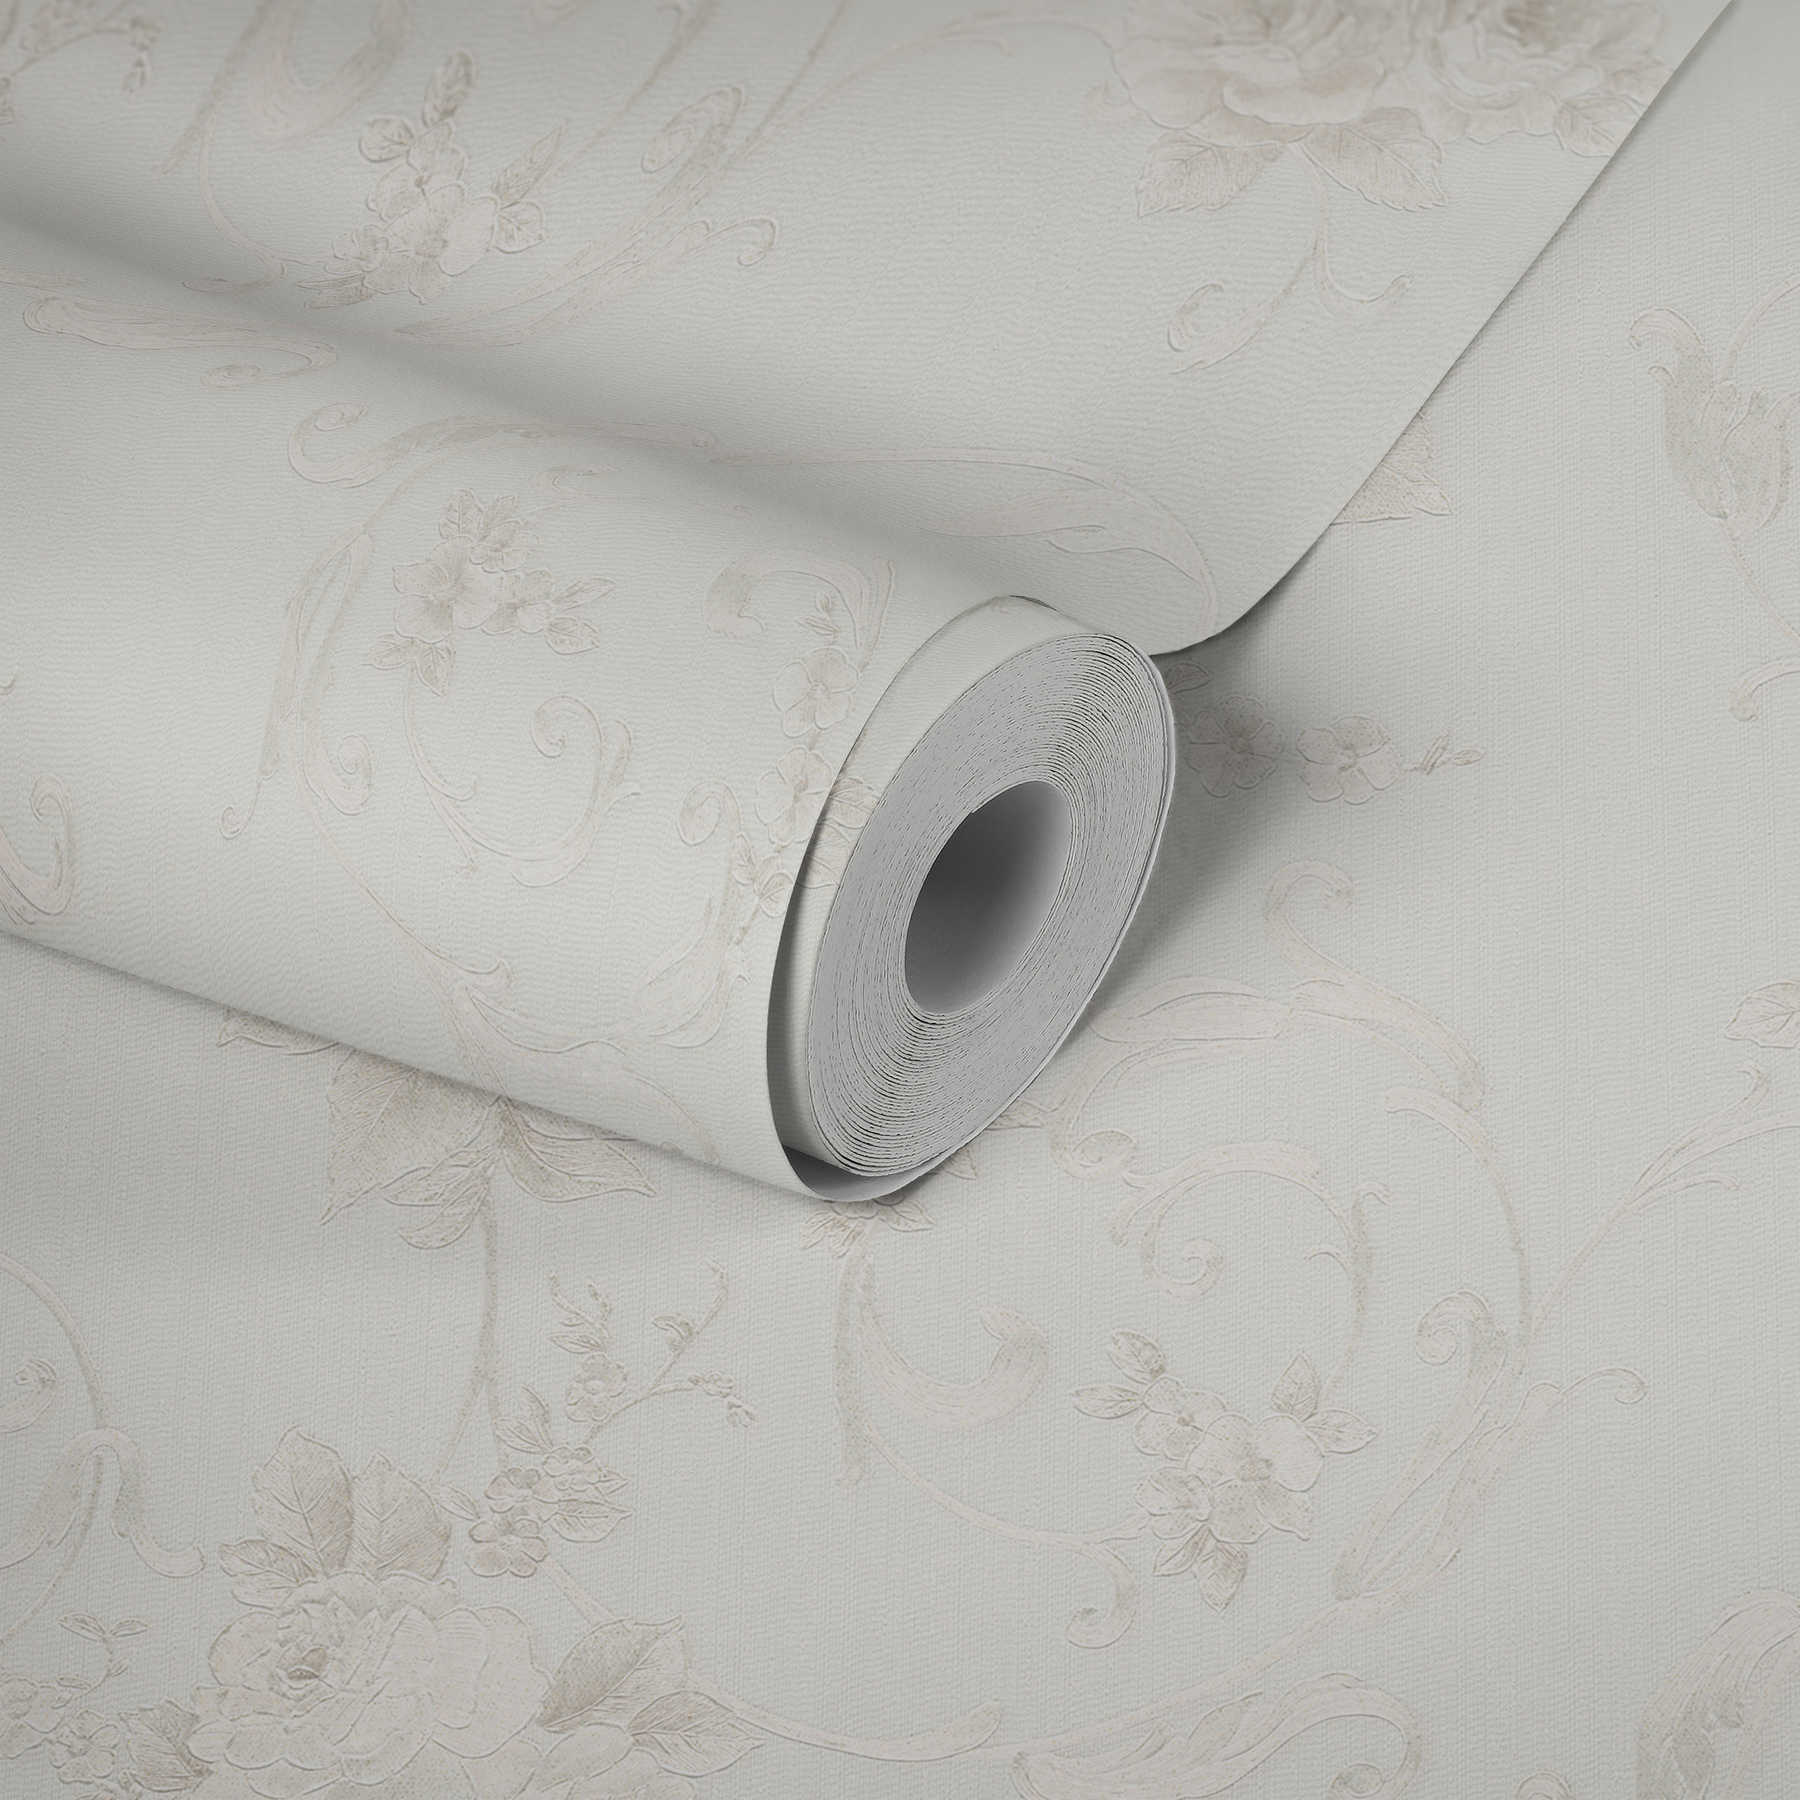             Rose petal wallpaper with metallic effect in country style - grey, bronze, white
        